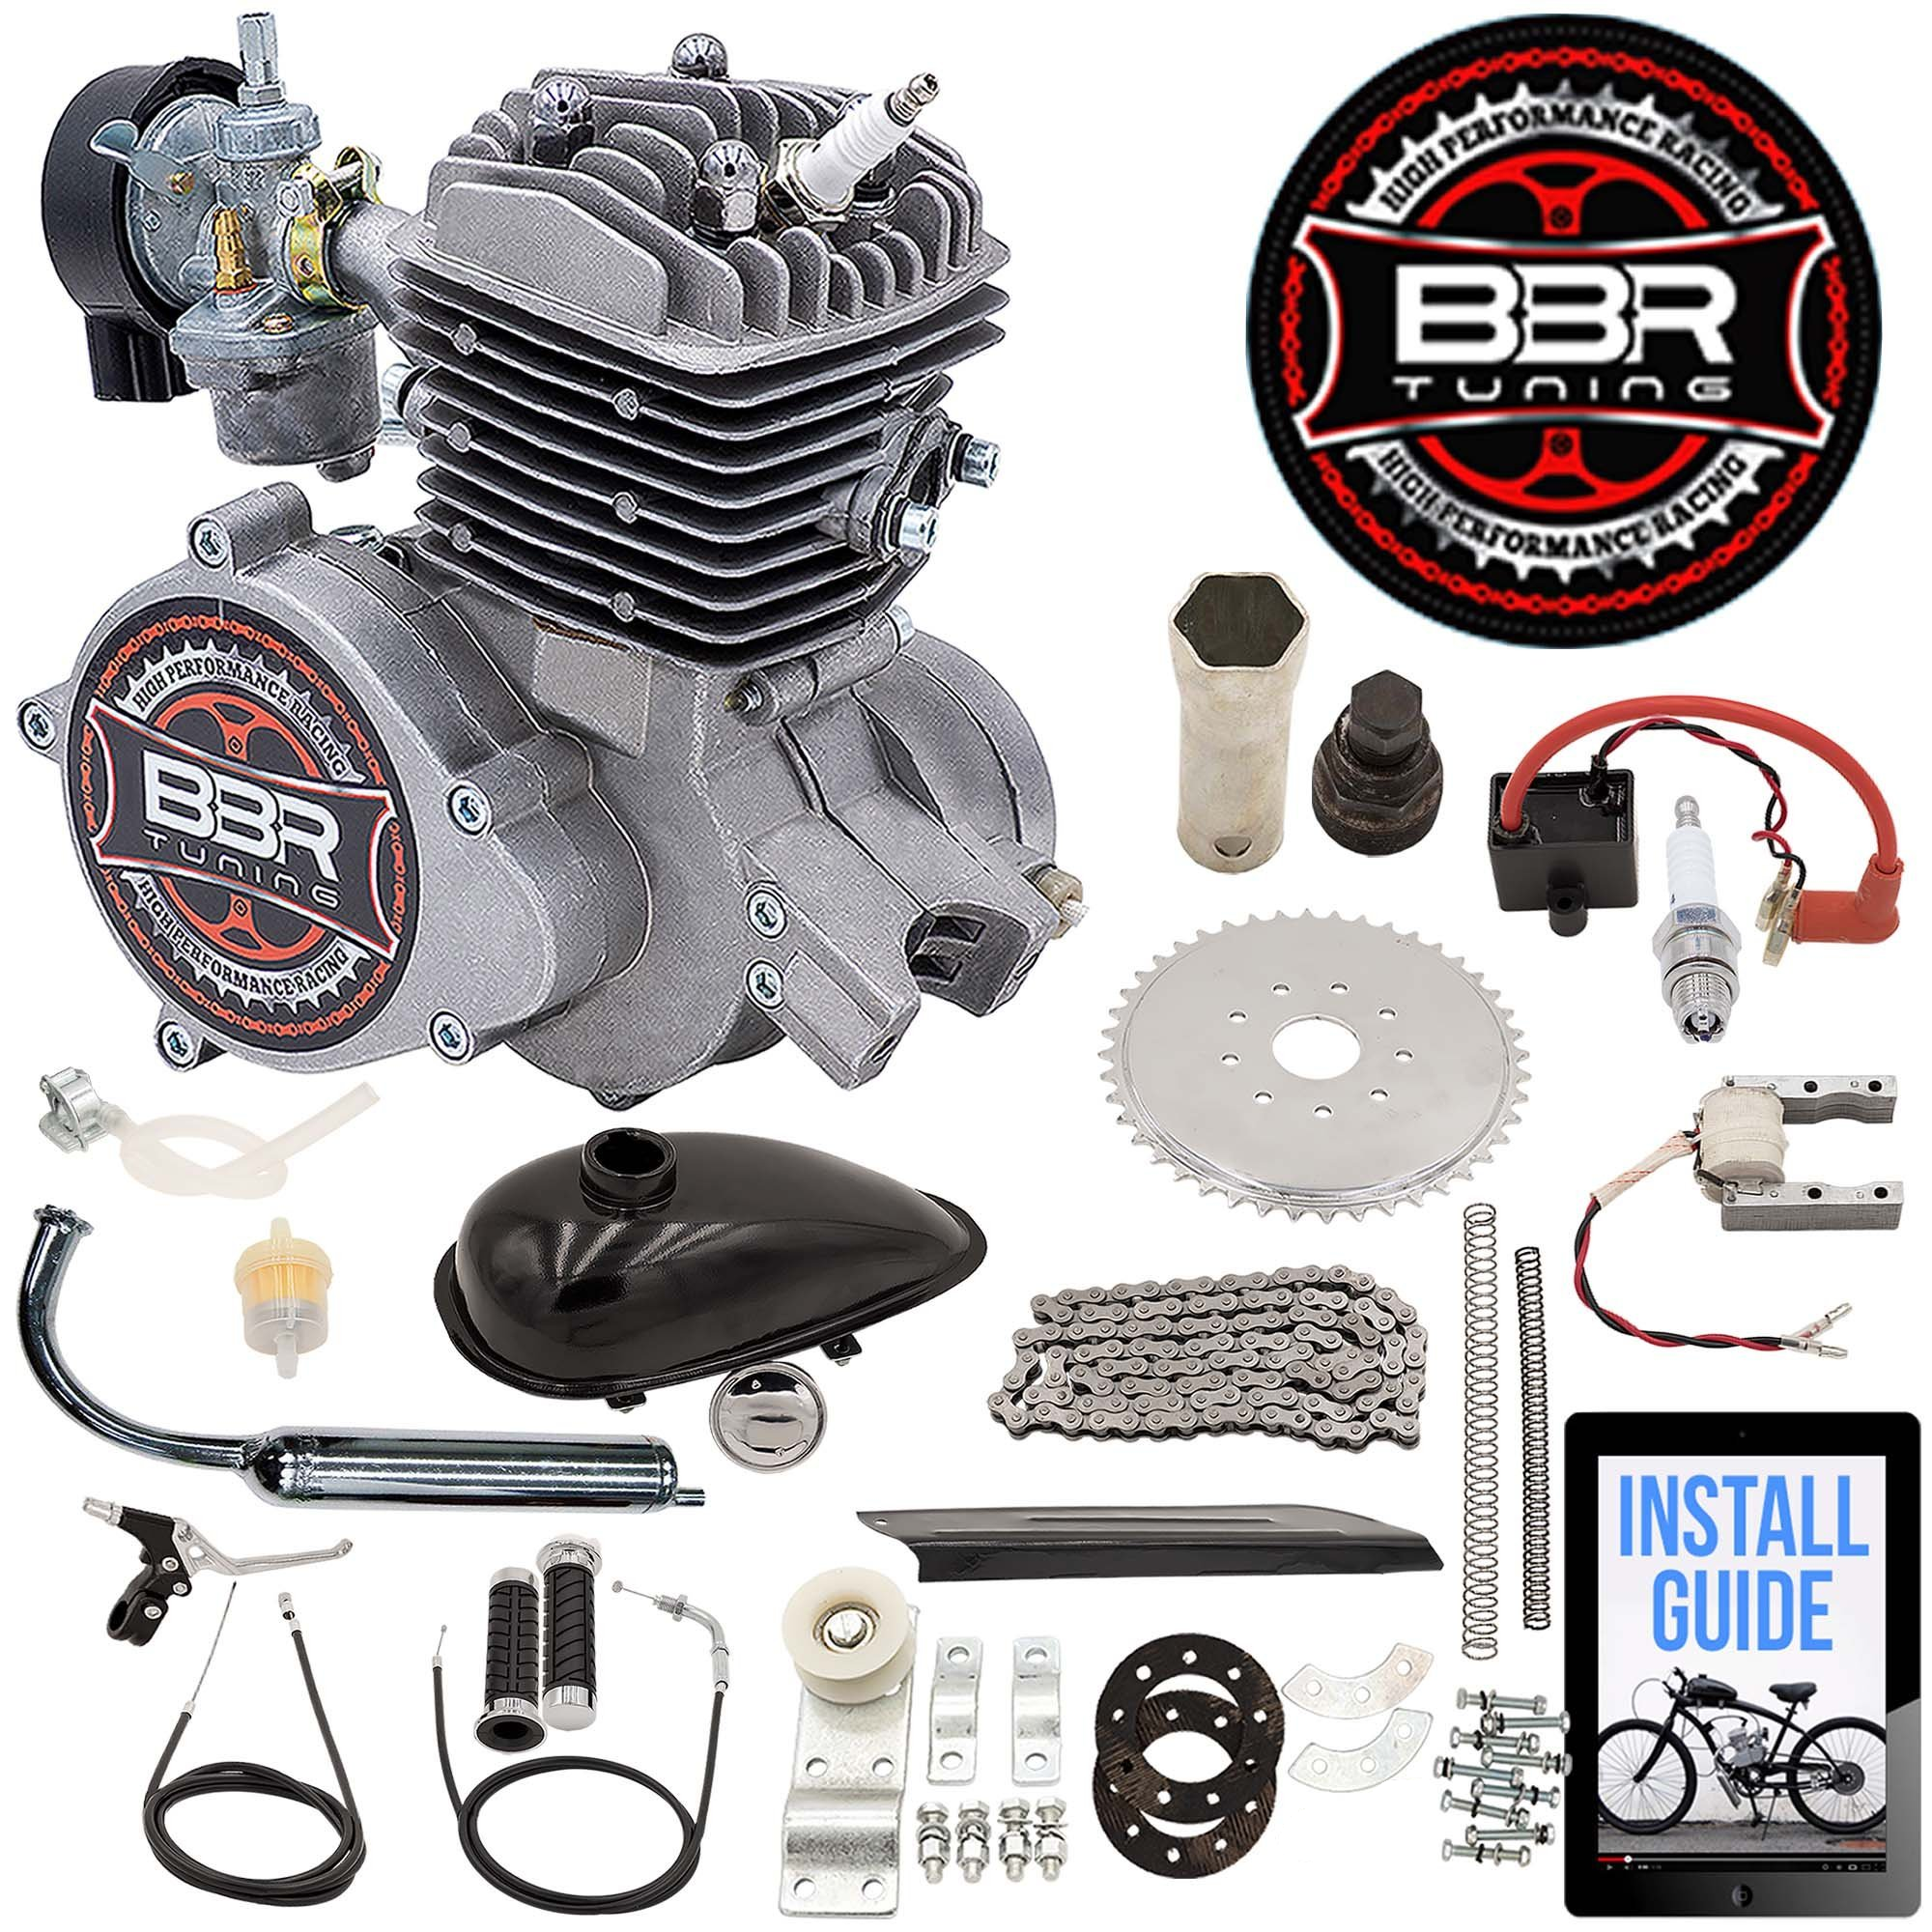 Flying Horse Engines - Silver Angle Fire 2-Stroke Bicycle Engine Kit